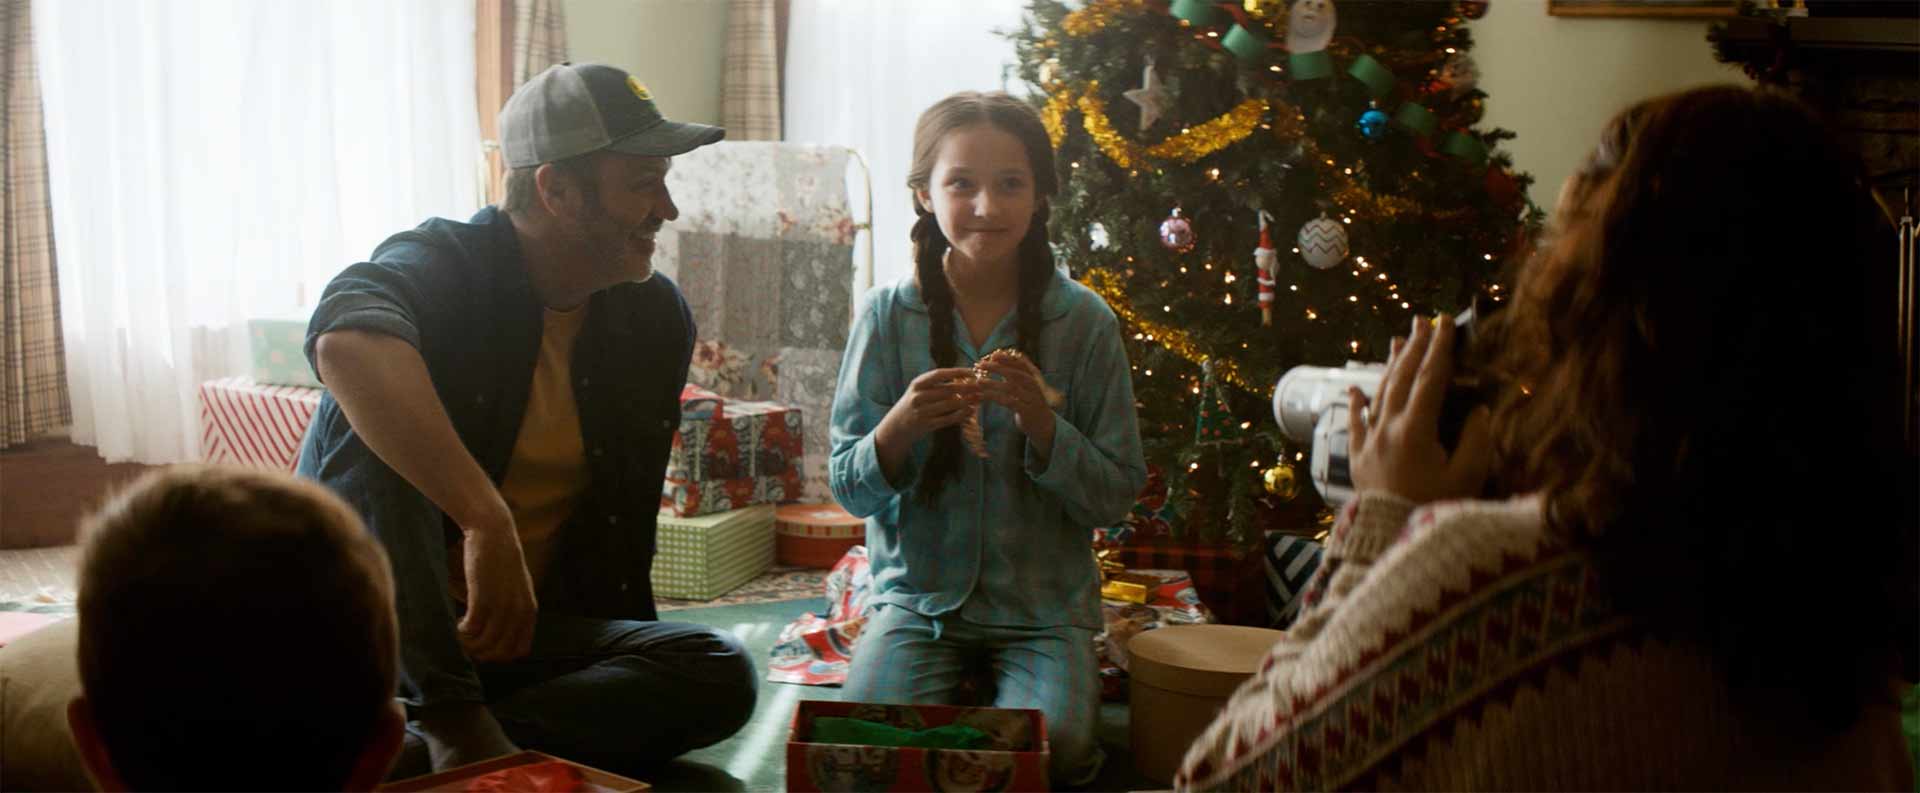 Young girl (about 10) kneels on the floor opening a present with her father watching her from the side.